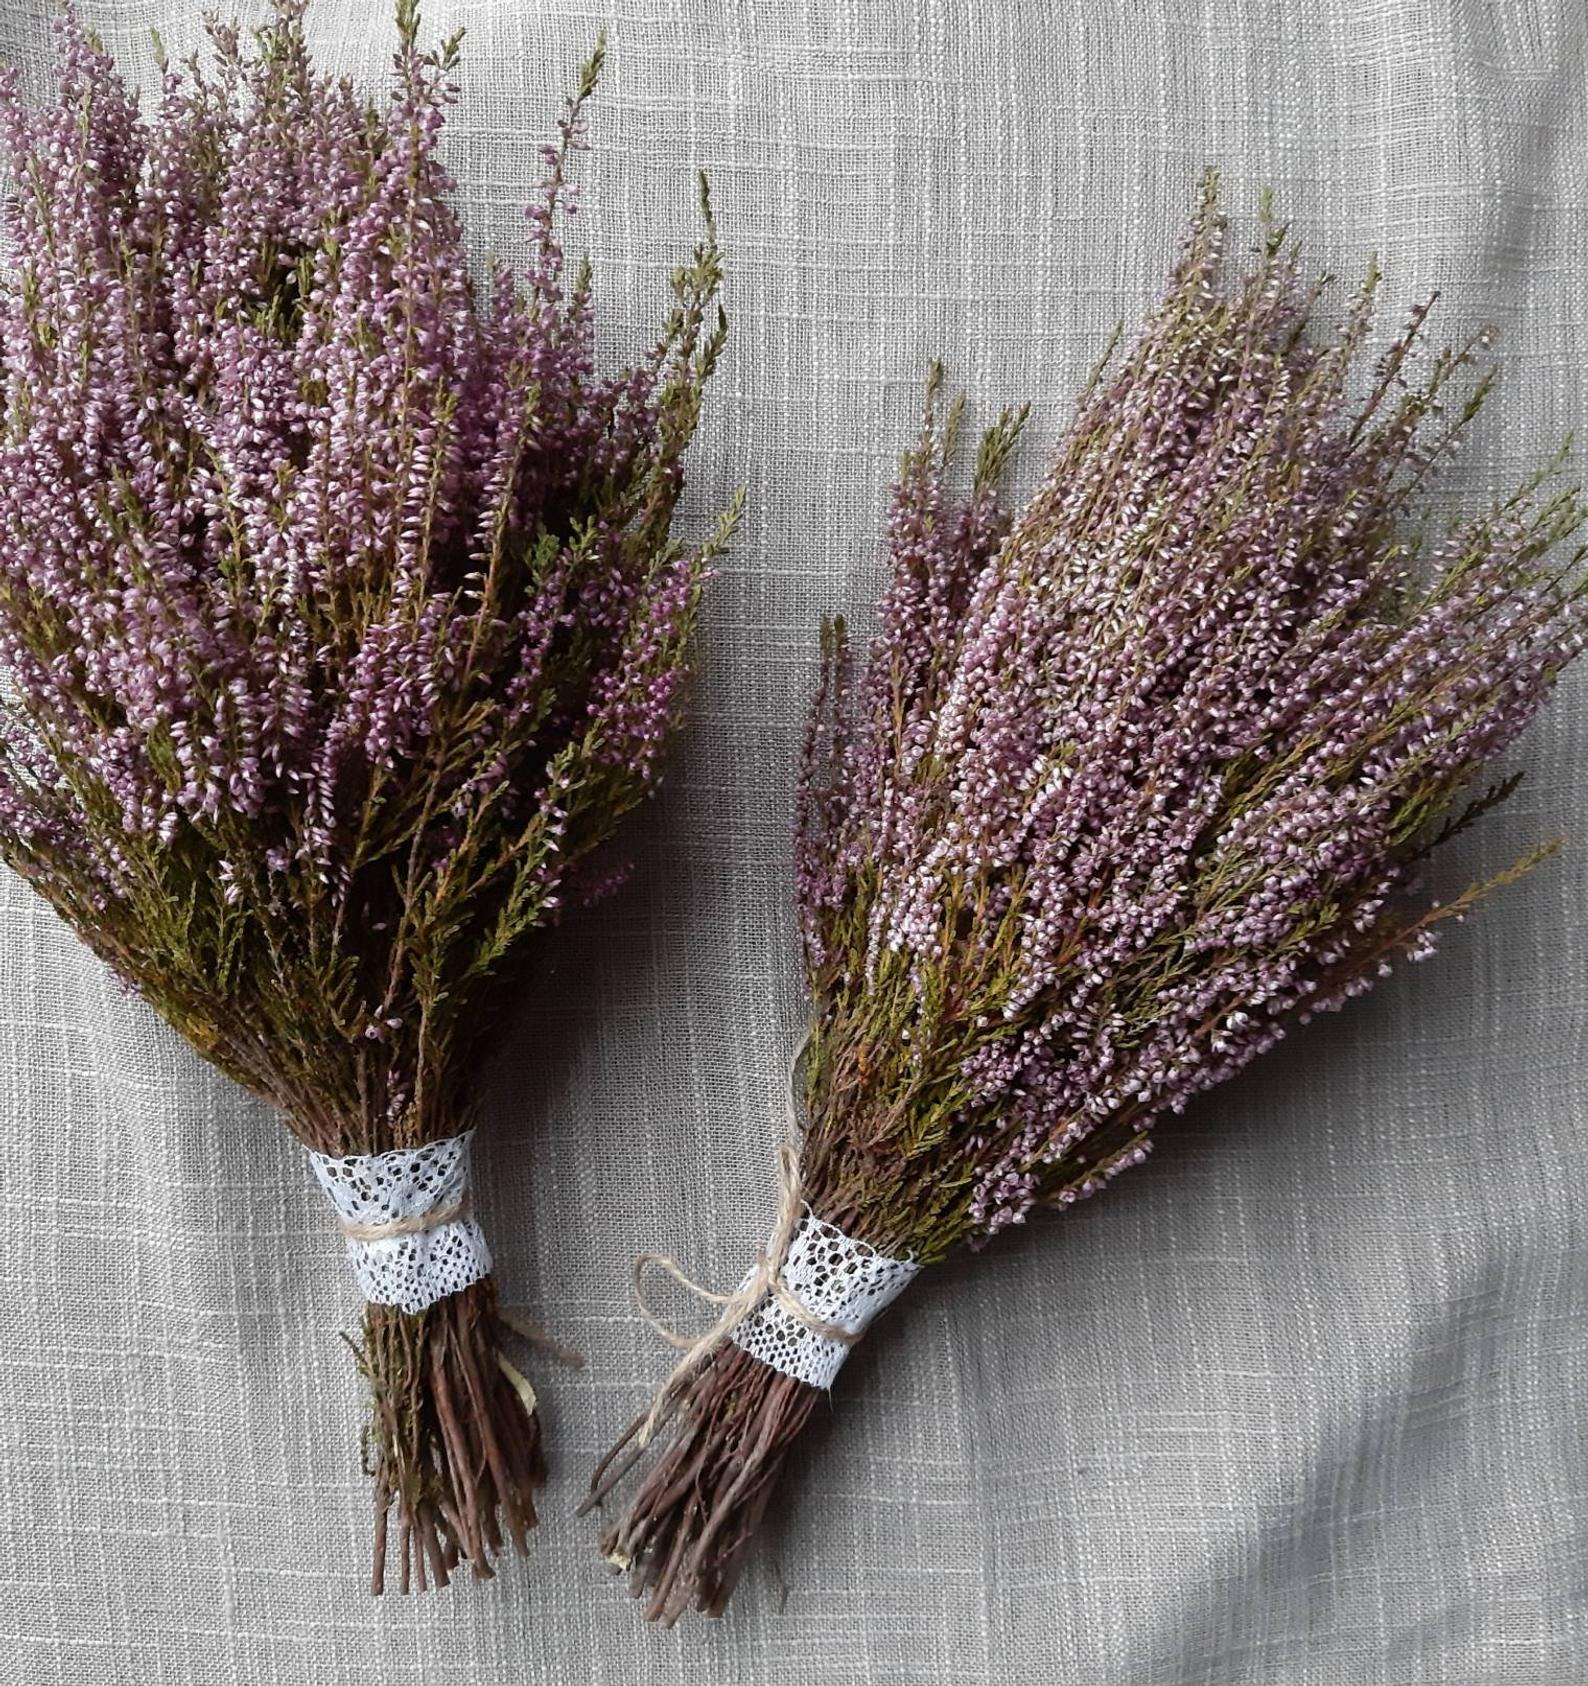 dried lavender bunches from Etsy